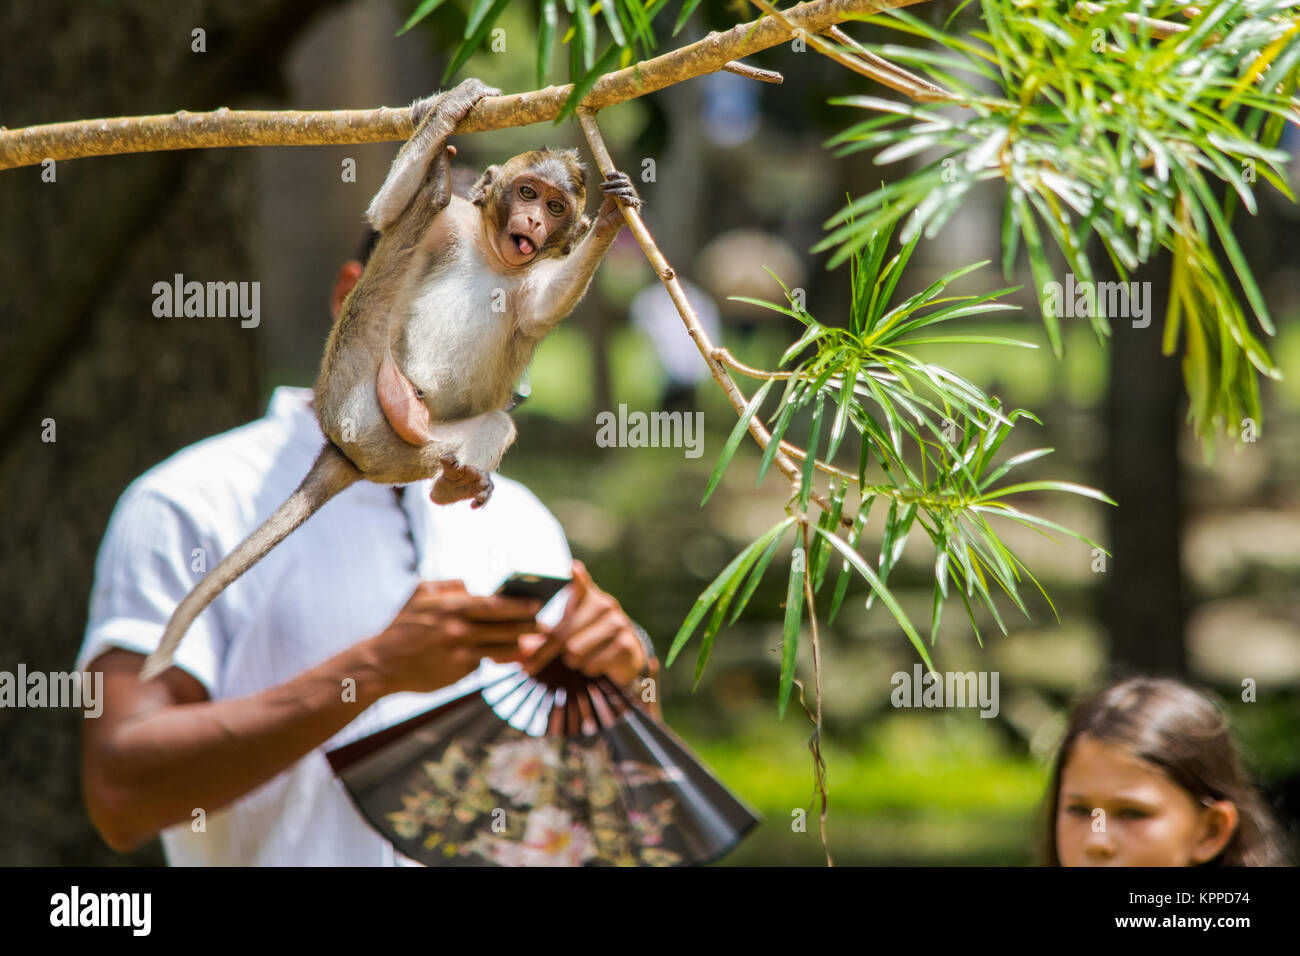 A photo of a young macaque monkey taken at the exact moment, in replacing the face of a man behind it. Monkey photobomb. Cambodia, Sout East Asia Stock Photo